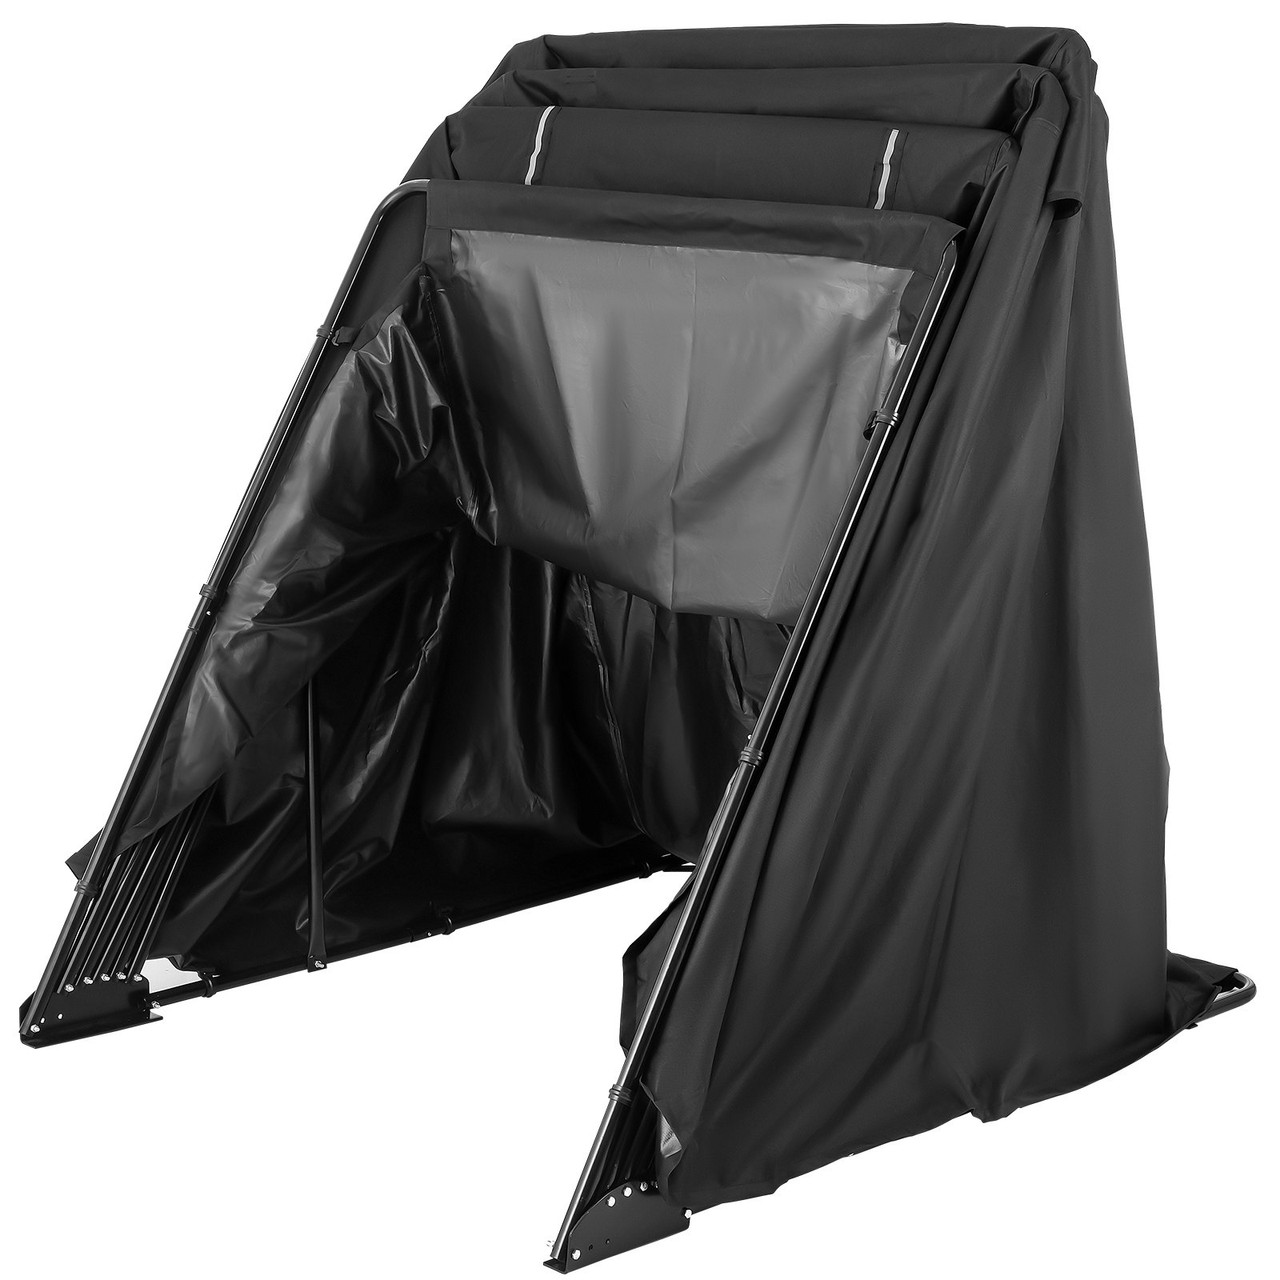 Motorcycle Shelter Shed Strong Frame Motorbike Garage Waterproof 106.3"x 41.3"x 61" Motorbike Cover Tent Scooter Shelter 120055 Hoods for Vehicles